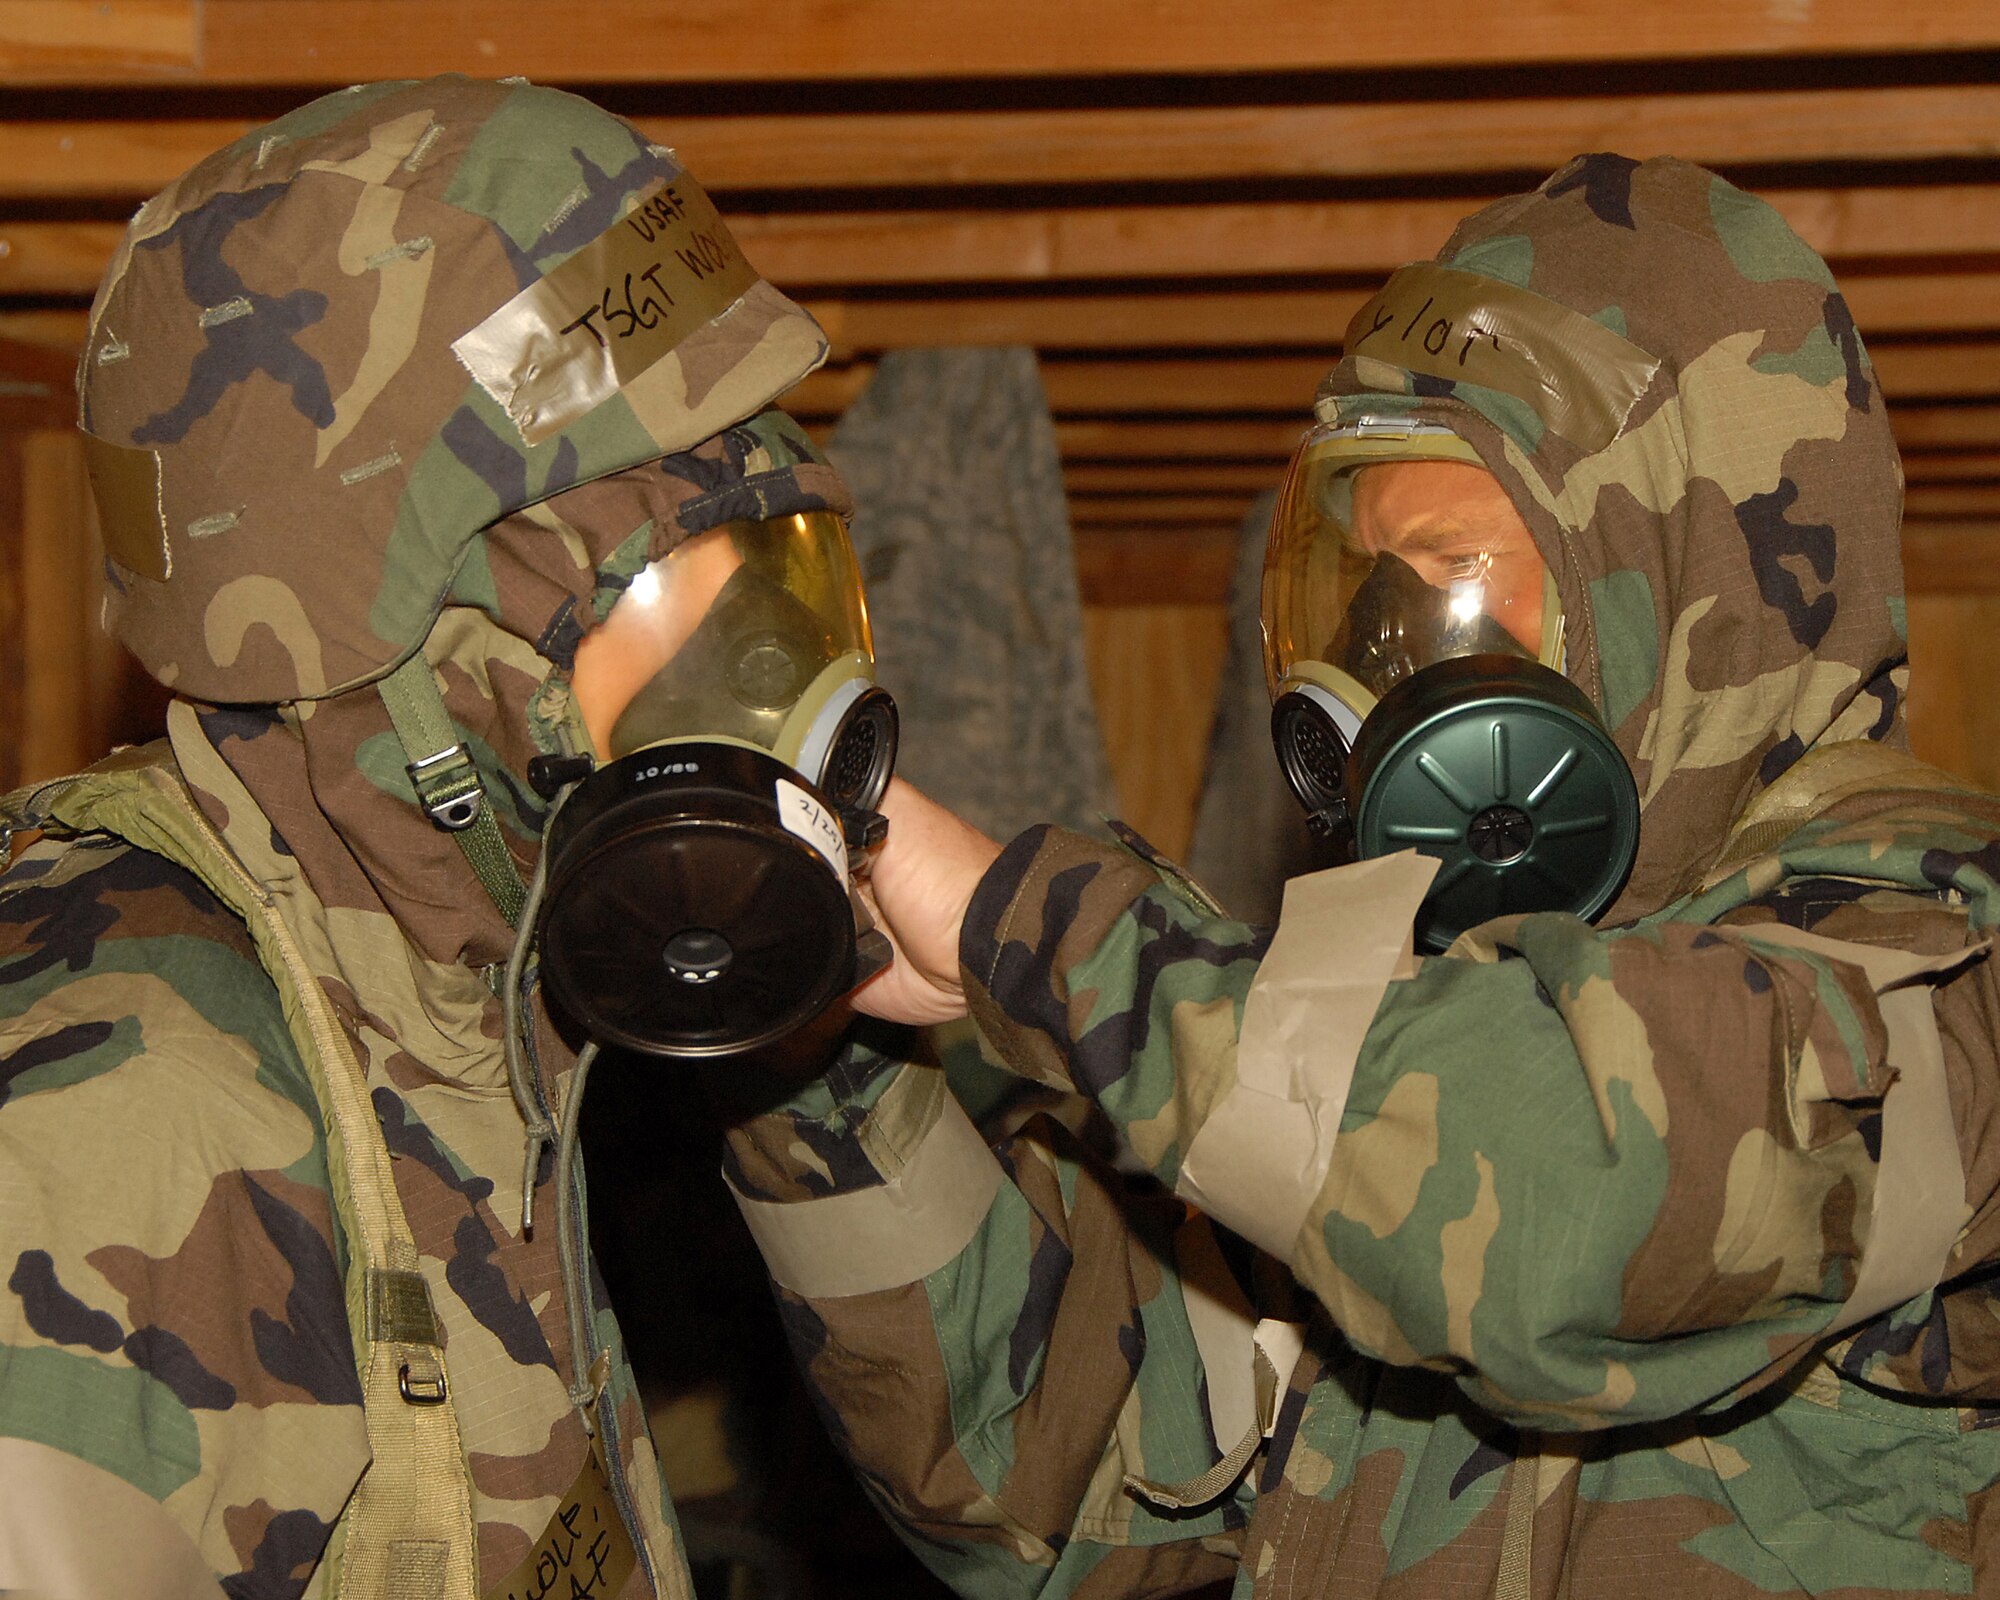 The 130th Engineering Installation Squadron held a super drill at Wendover Air Field, Wendover, Utah June 4-7 in preparation for their upcoming Operational Readiness Inspection. Tech. Sgt. Gregory Taylor assists Tech. Sgt. Jason Wolf with his chemical mask during a MOPP 4 drill. For four days the 130th EIS reenacted several mock chemical attacks where they practiced donning chemical gear, searching for unexploded ordinances and patrolling the area for toxic levels of chemical agents.  U.S. Air Force photo by Staff Sgt. Emily Monson.